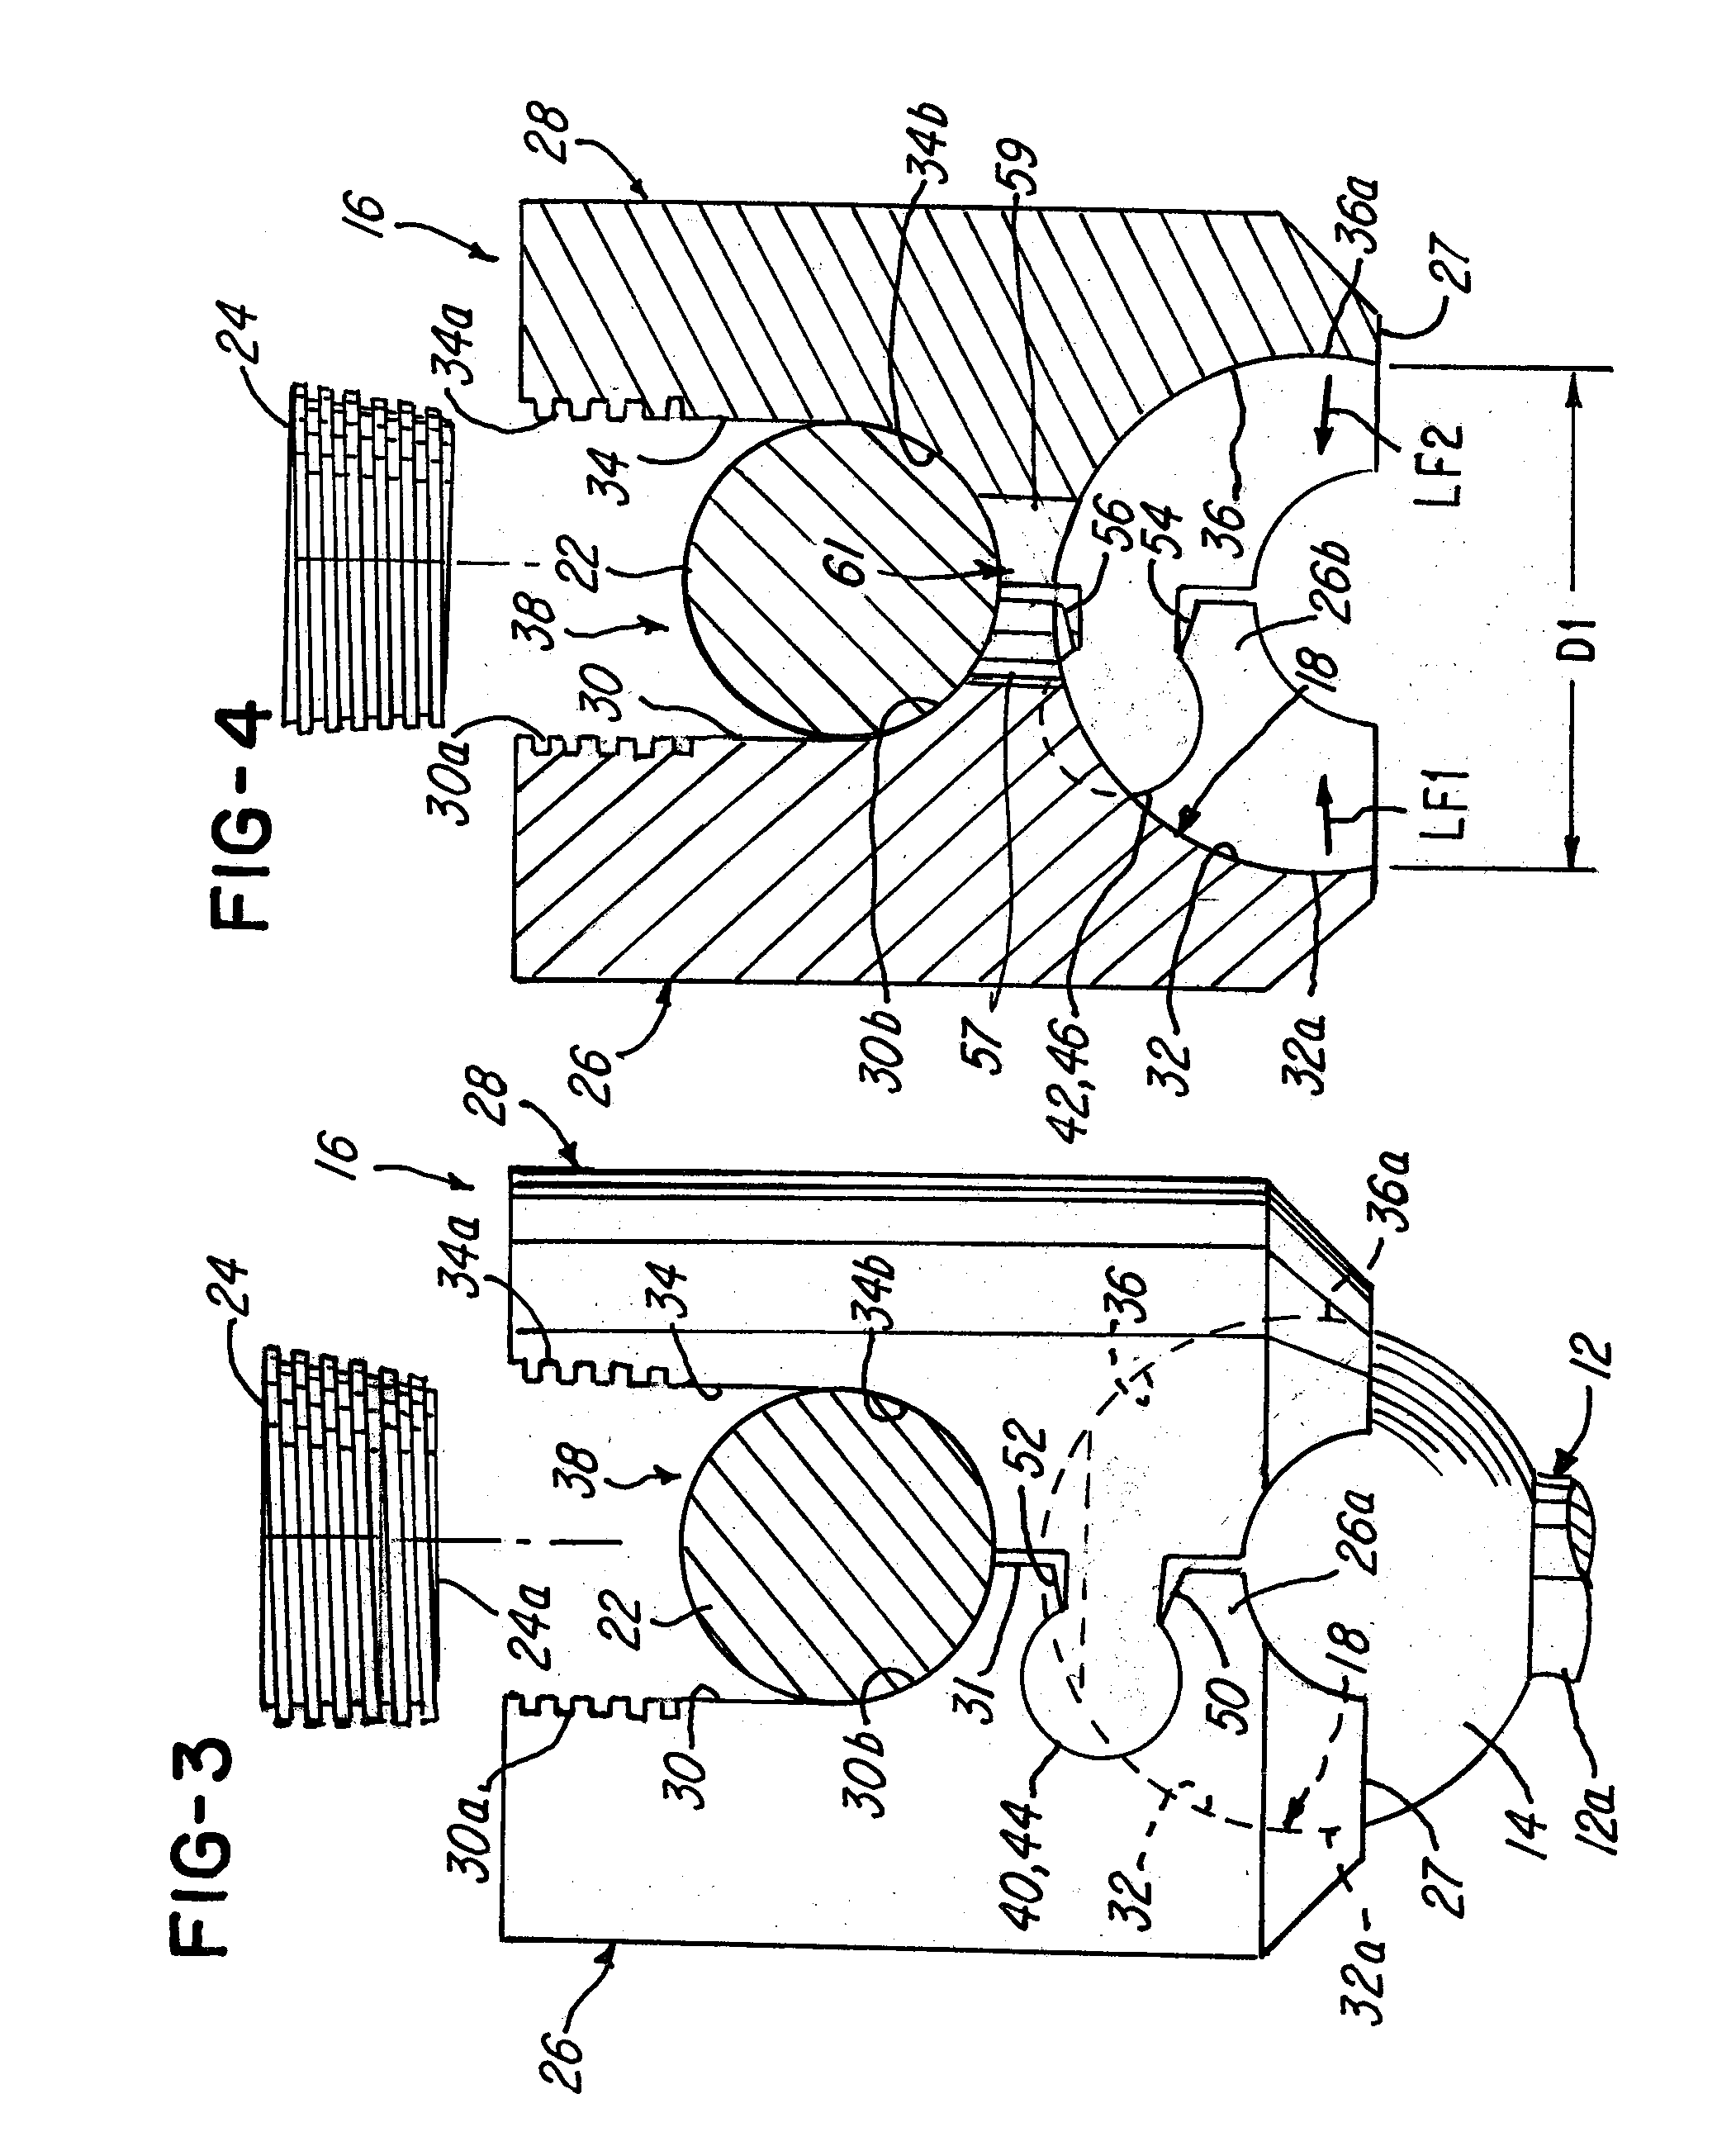 Polyaxial screw system and method having a hinged receiver